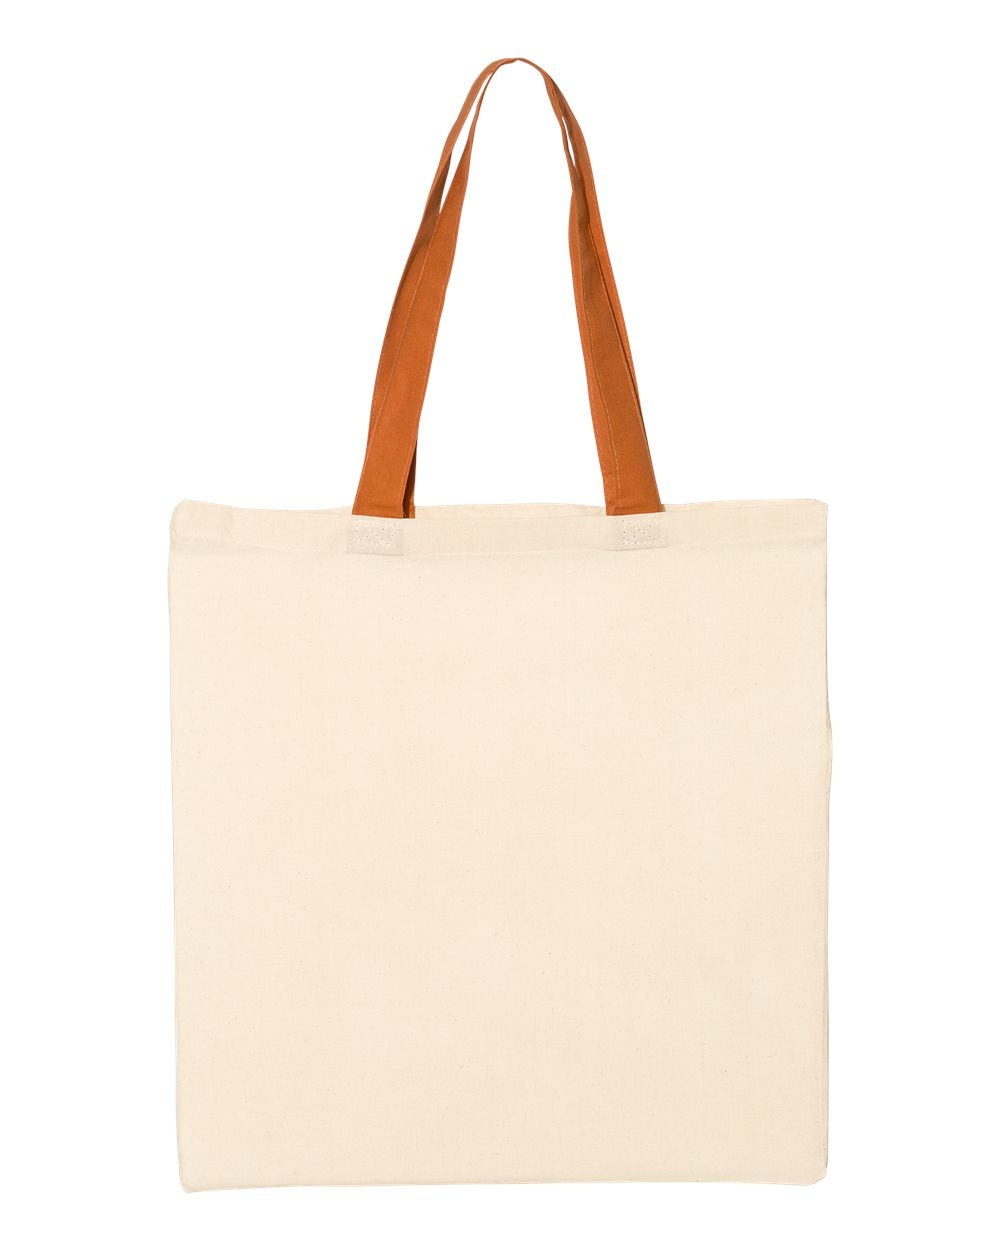 Economical Tote with Contrast-Color Handles